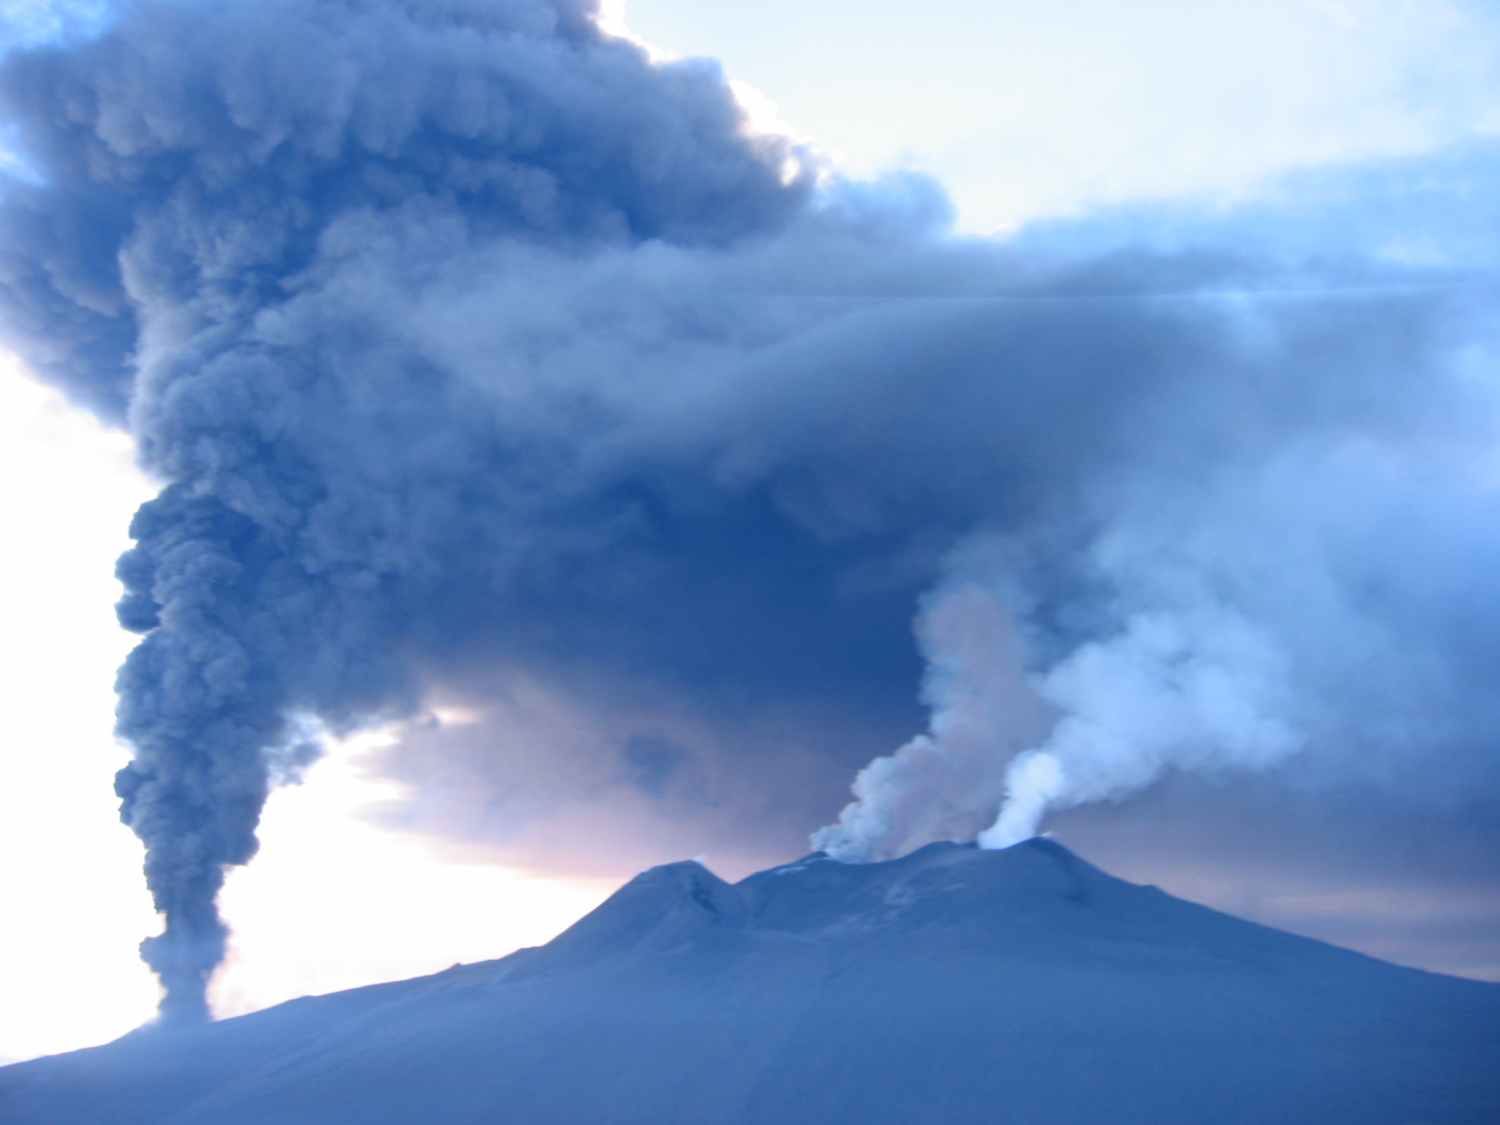 Picture of plumes from the 2002-2003 eruption of Mt. Etna (Italy): courtesy of INGV (Sezione di Catania)